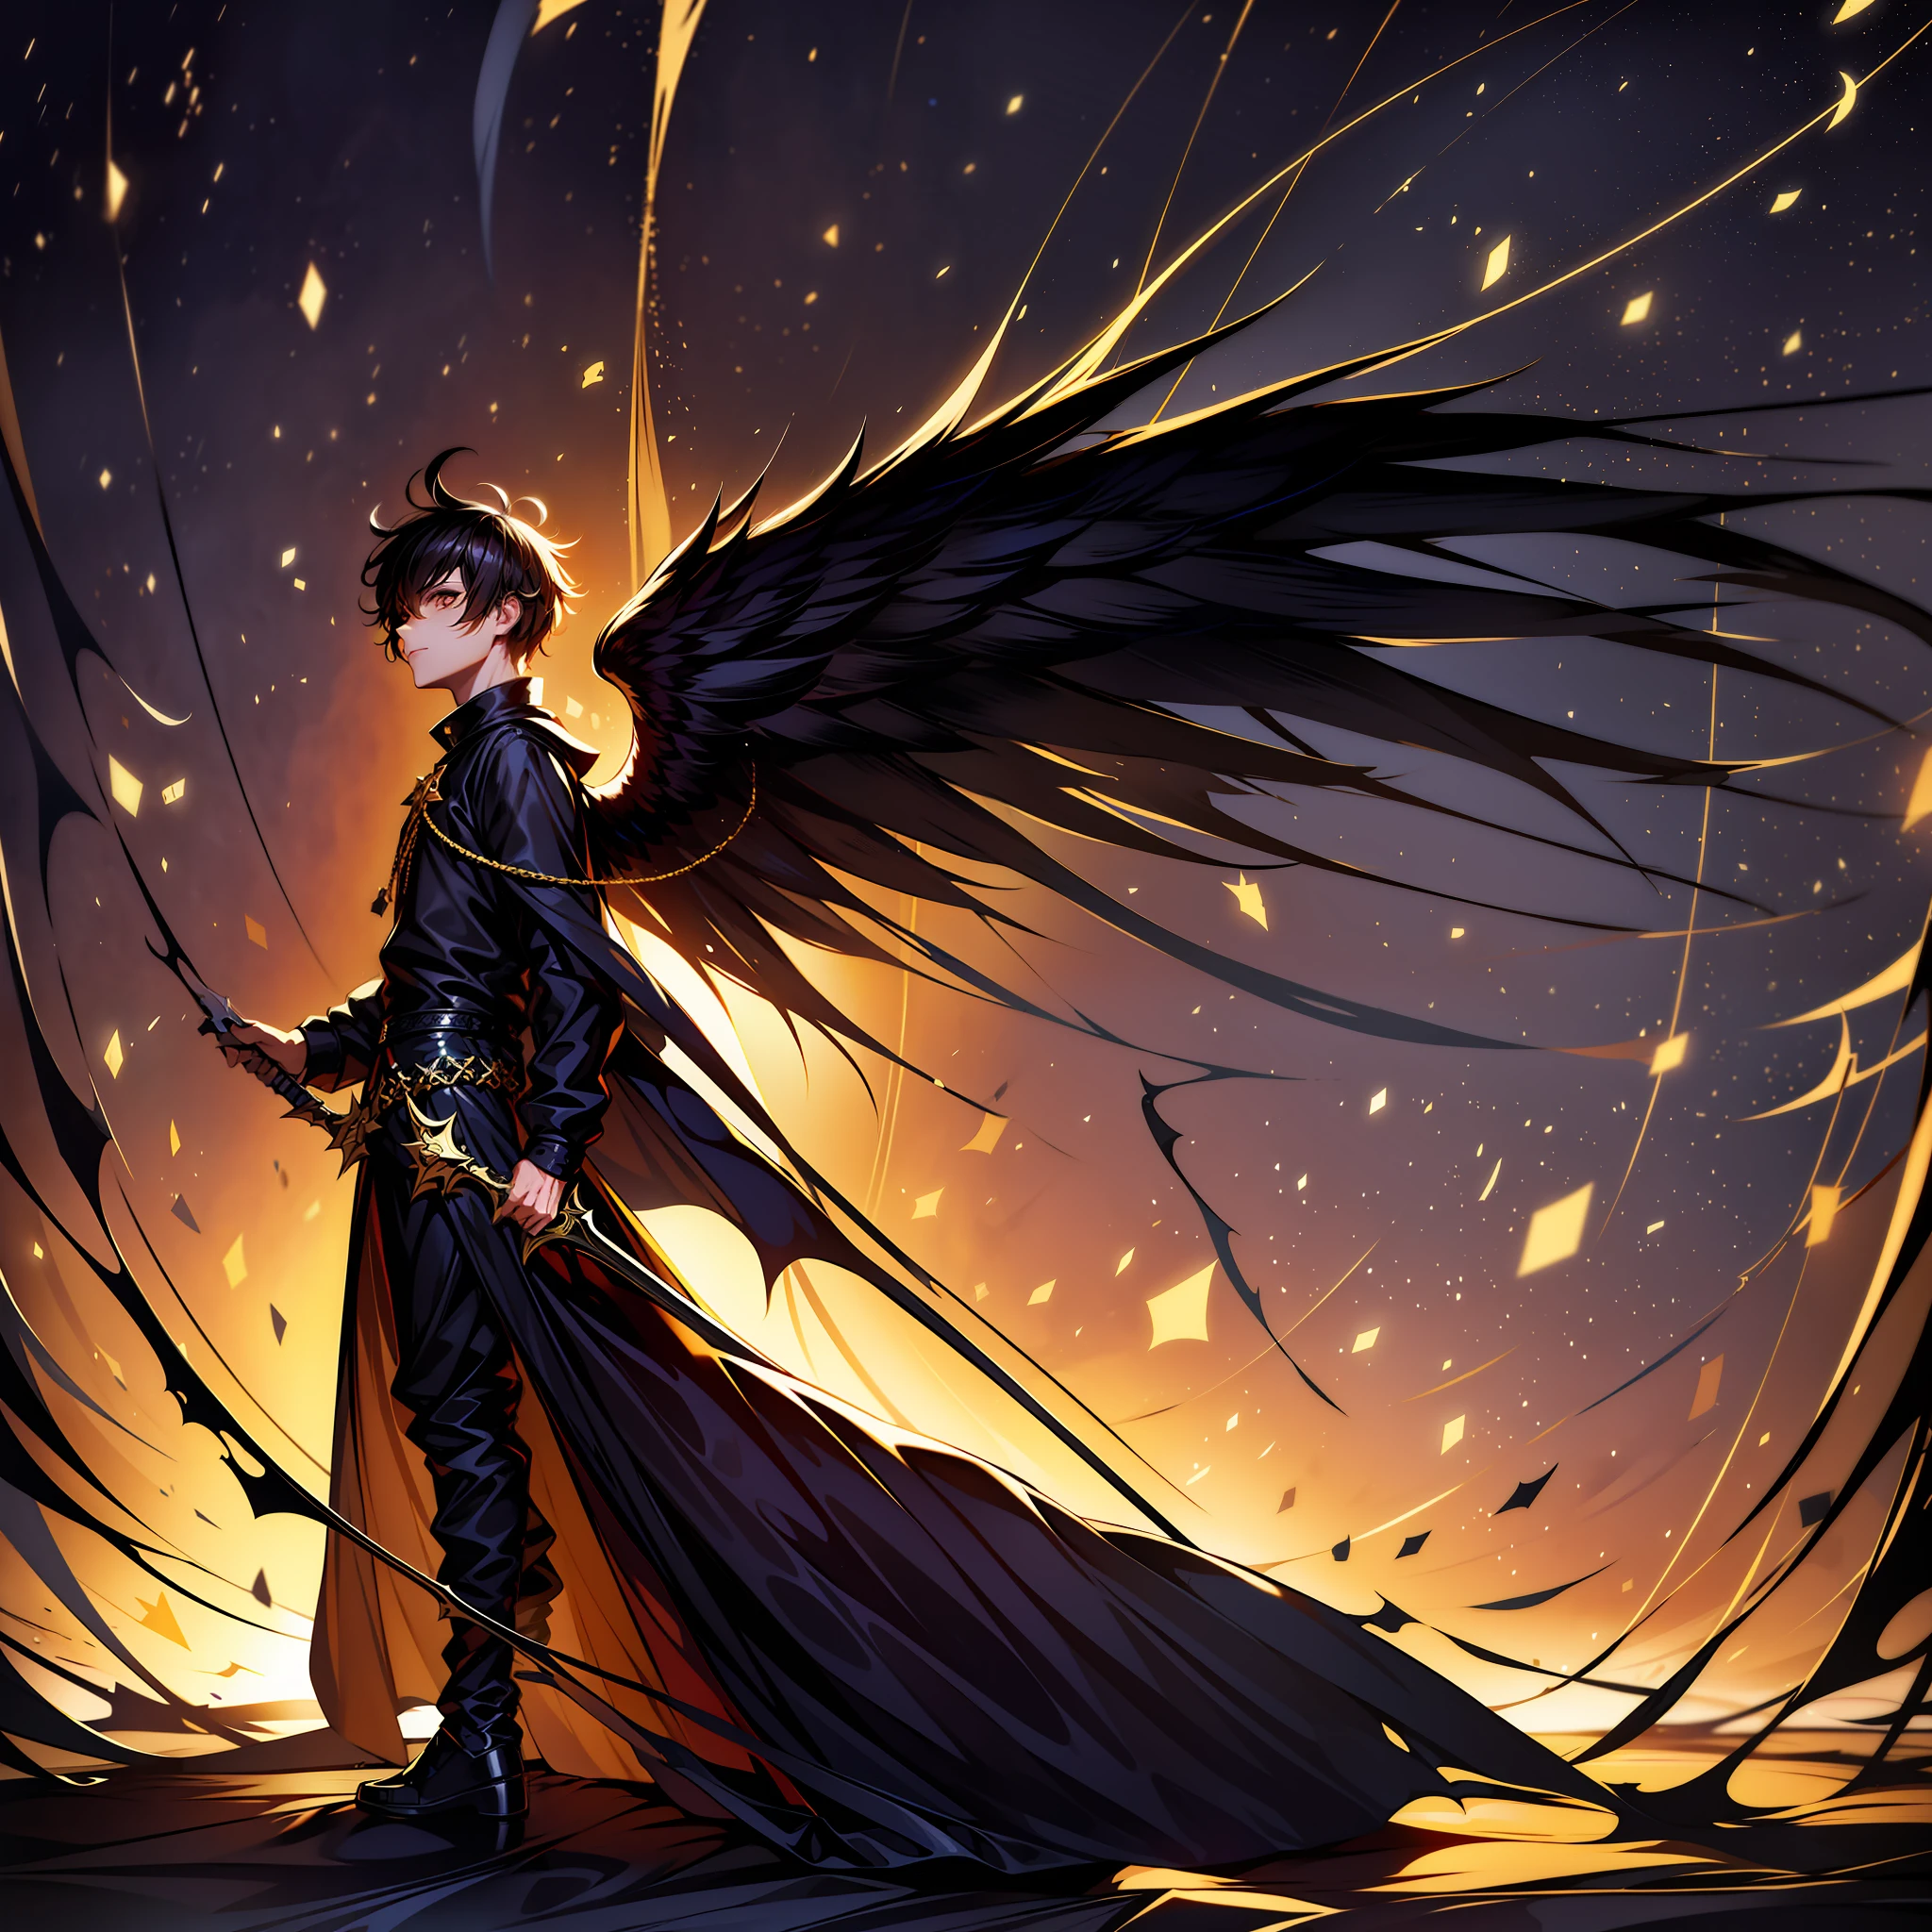 Draw a boy with a sword in his hand Golden Clothing Magic wrapped around his body and black wings with a black crown on his head